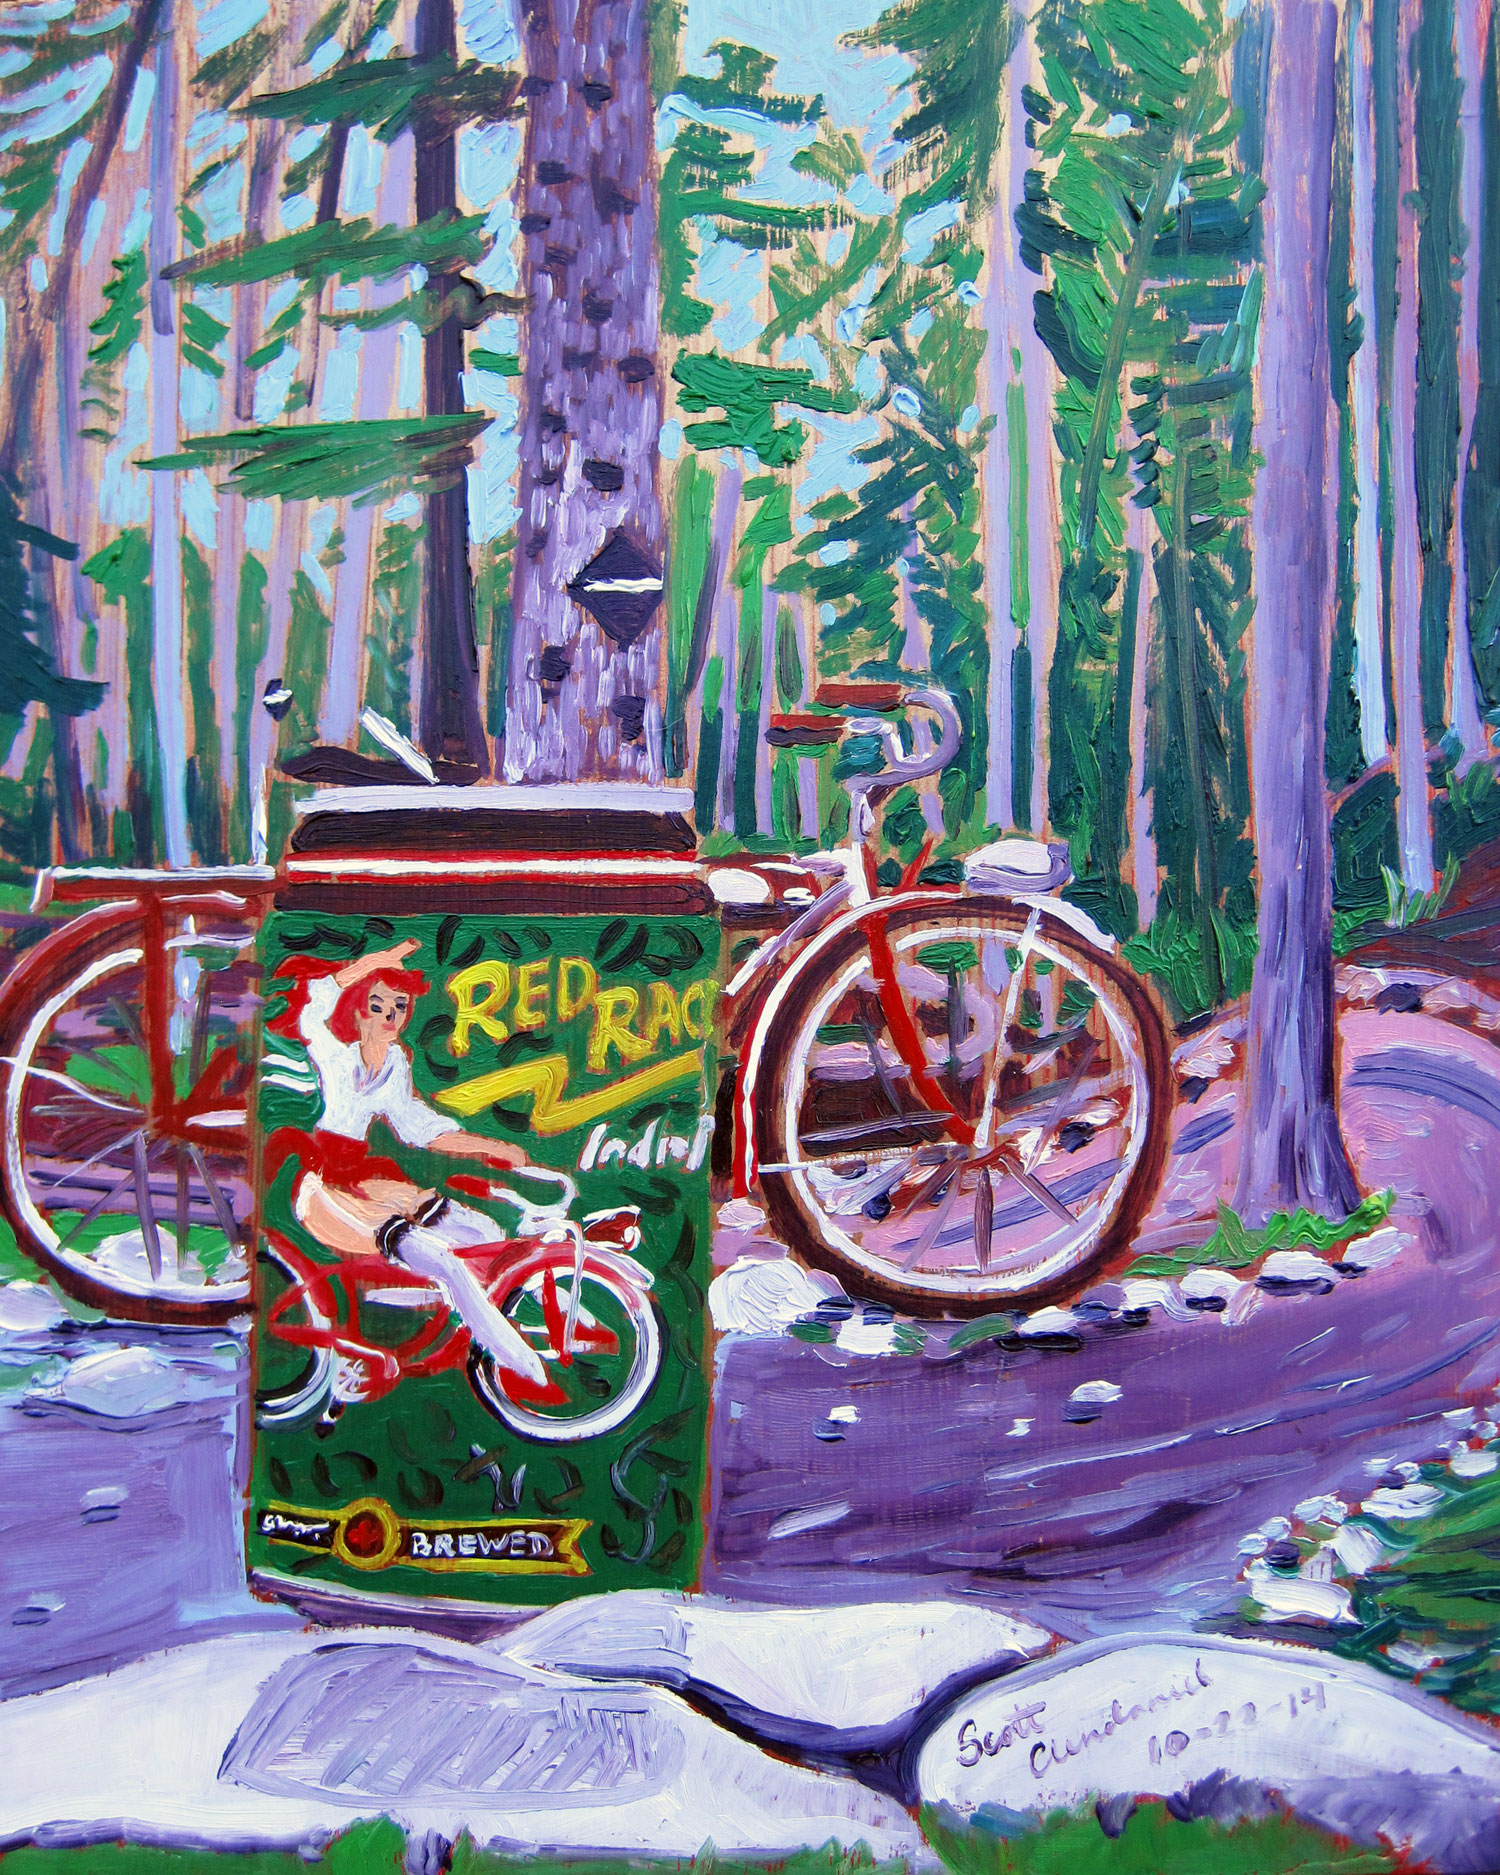 Beer Painting of Red Racer IPA by Central City Brewing Year of Beer Paintings Scott Clendaniel